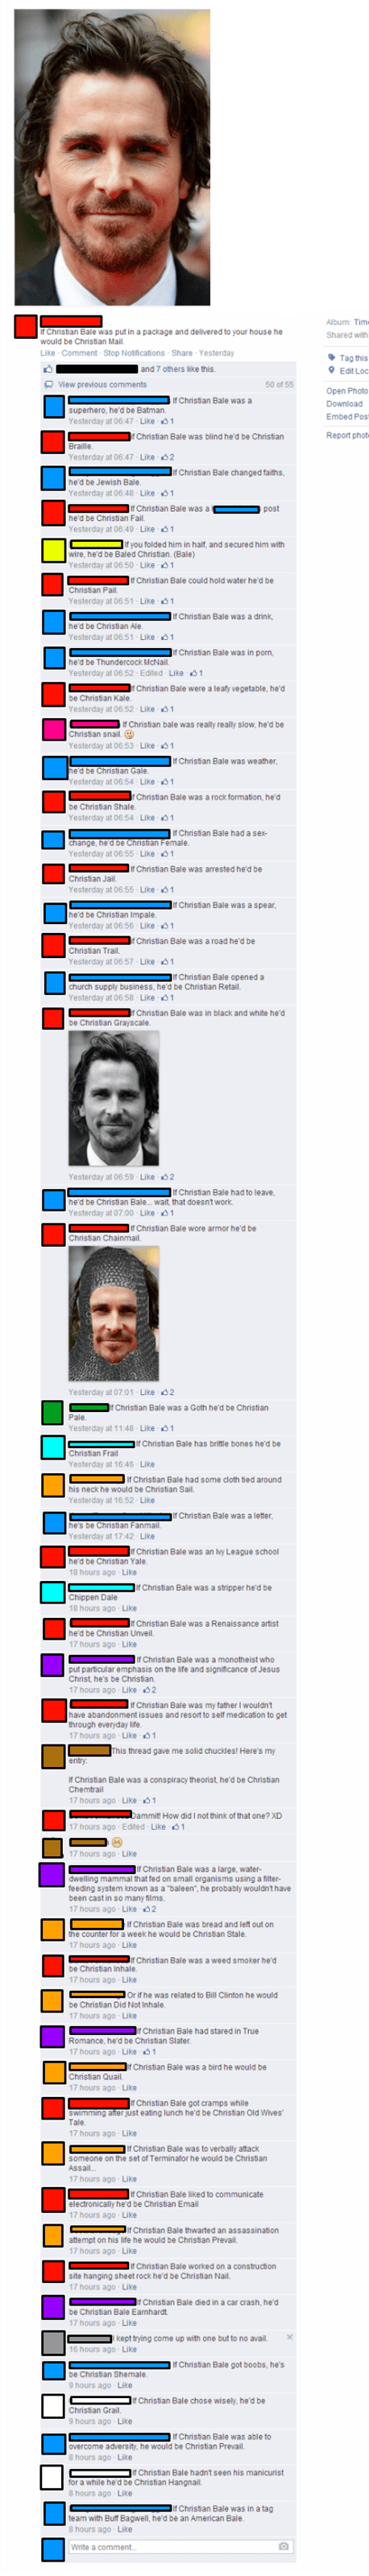 Will The Real Christian Bale Please Stand Up?